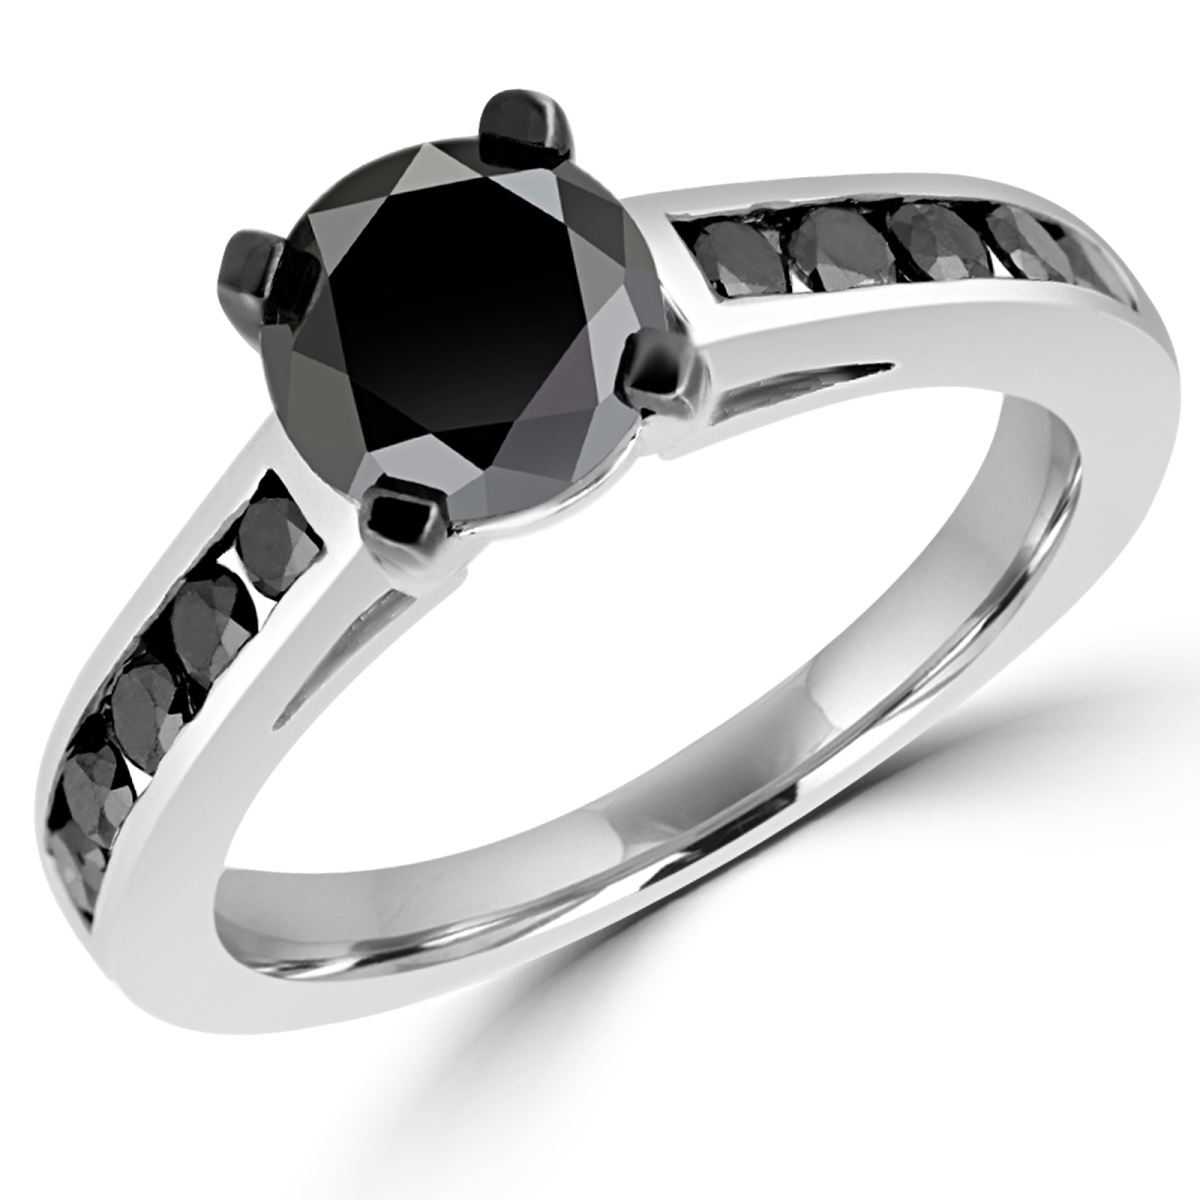 Picture of Majesty Diamonds MDR140105 0.9 CTW Round BlacK Diamond Solitaire Engagement Ring in 10K